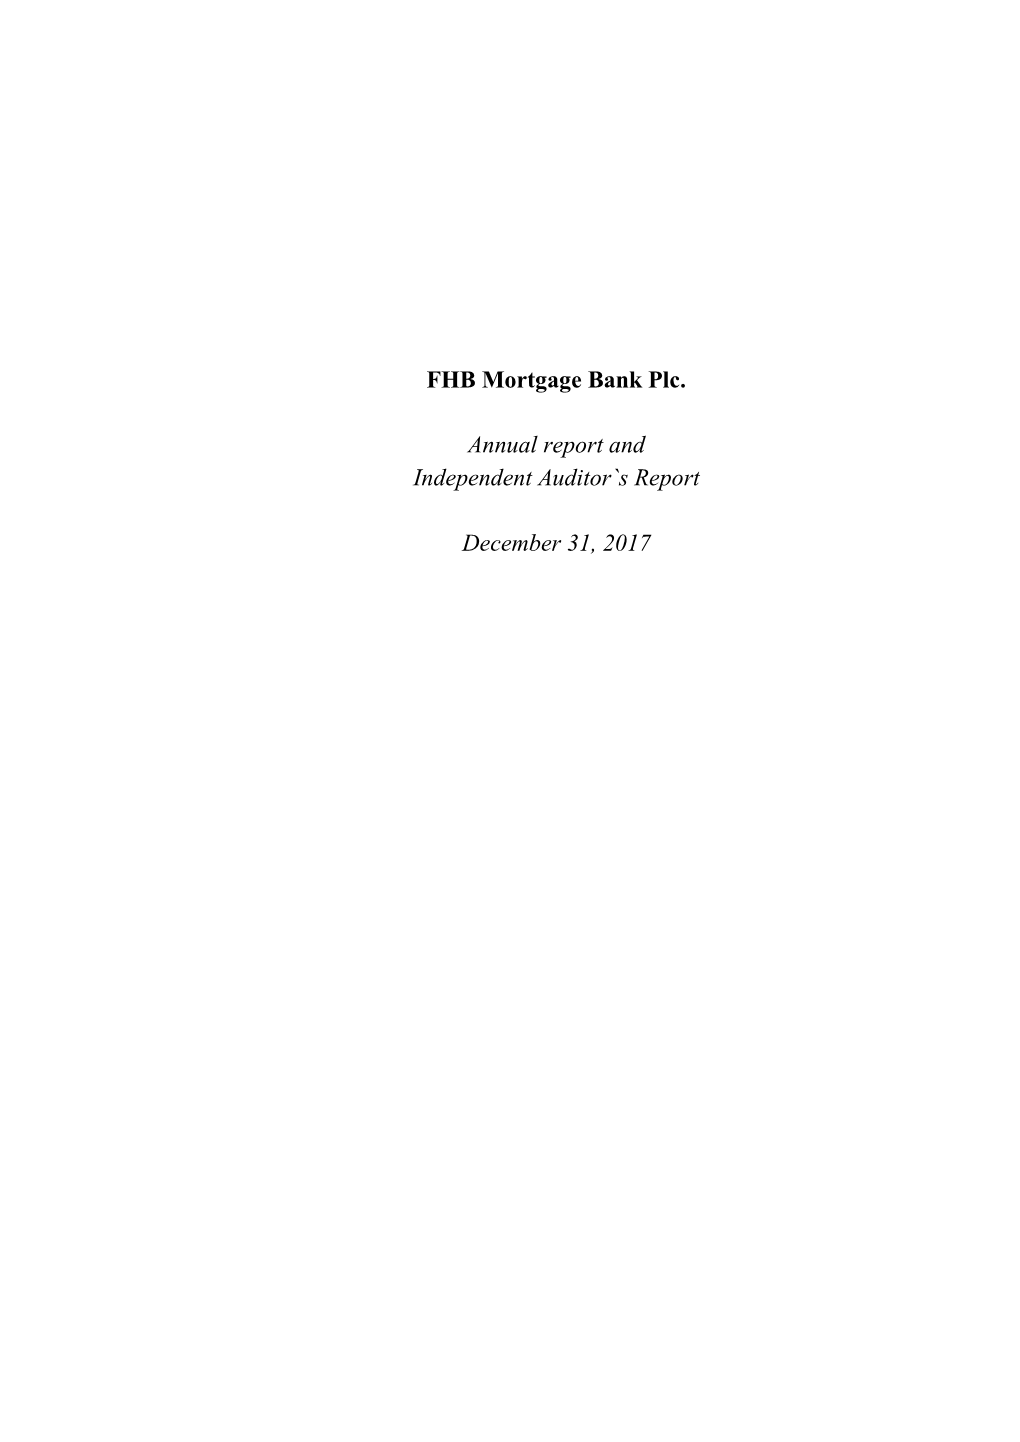 FHB Mortgage Bank Plc. Annual Report and Independent Auditor`S